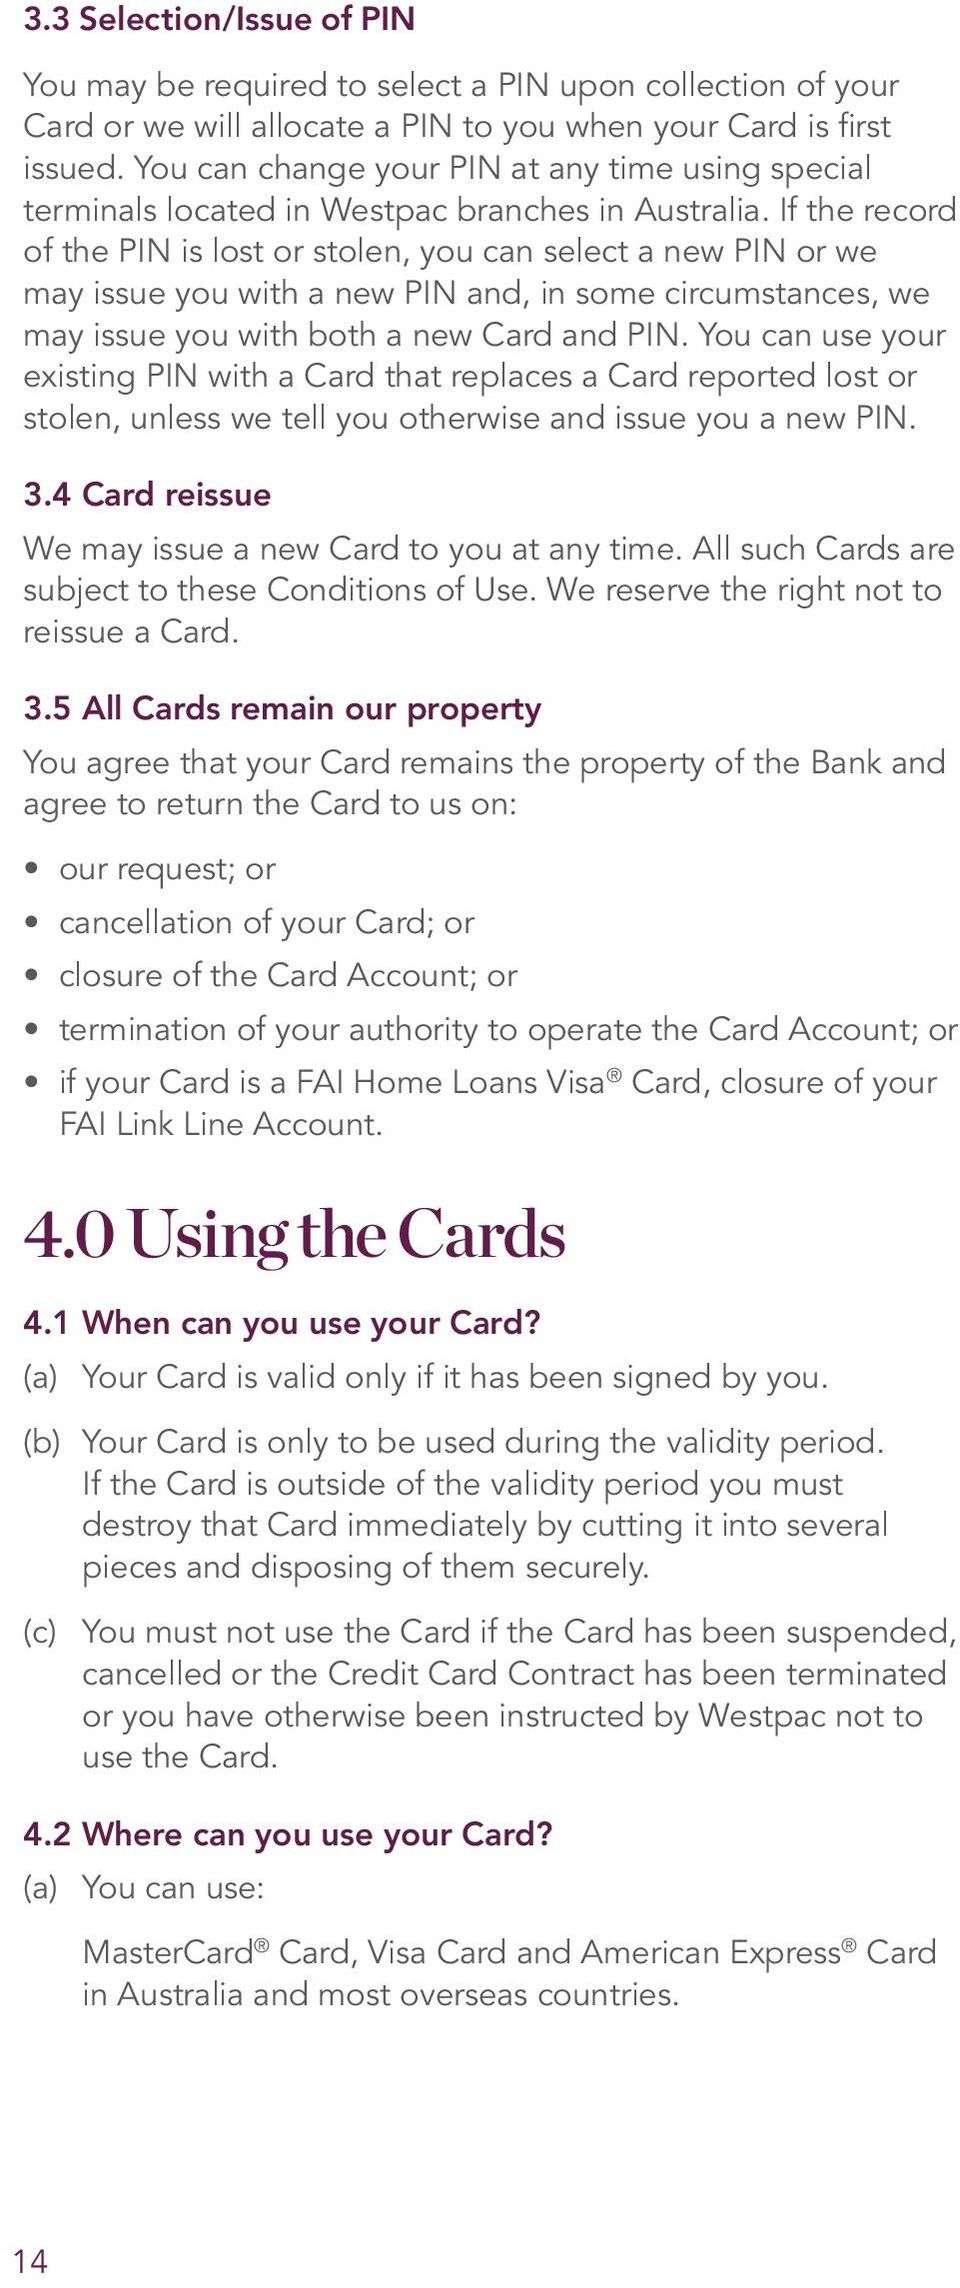 If the record of the PIN is lost or stolen, you can select a new PIN or we may issue you with a new PIN and, in some circumstances, we may issue you with both a new Card and PIN.